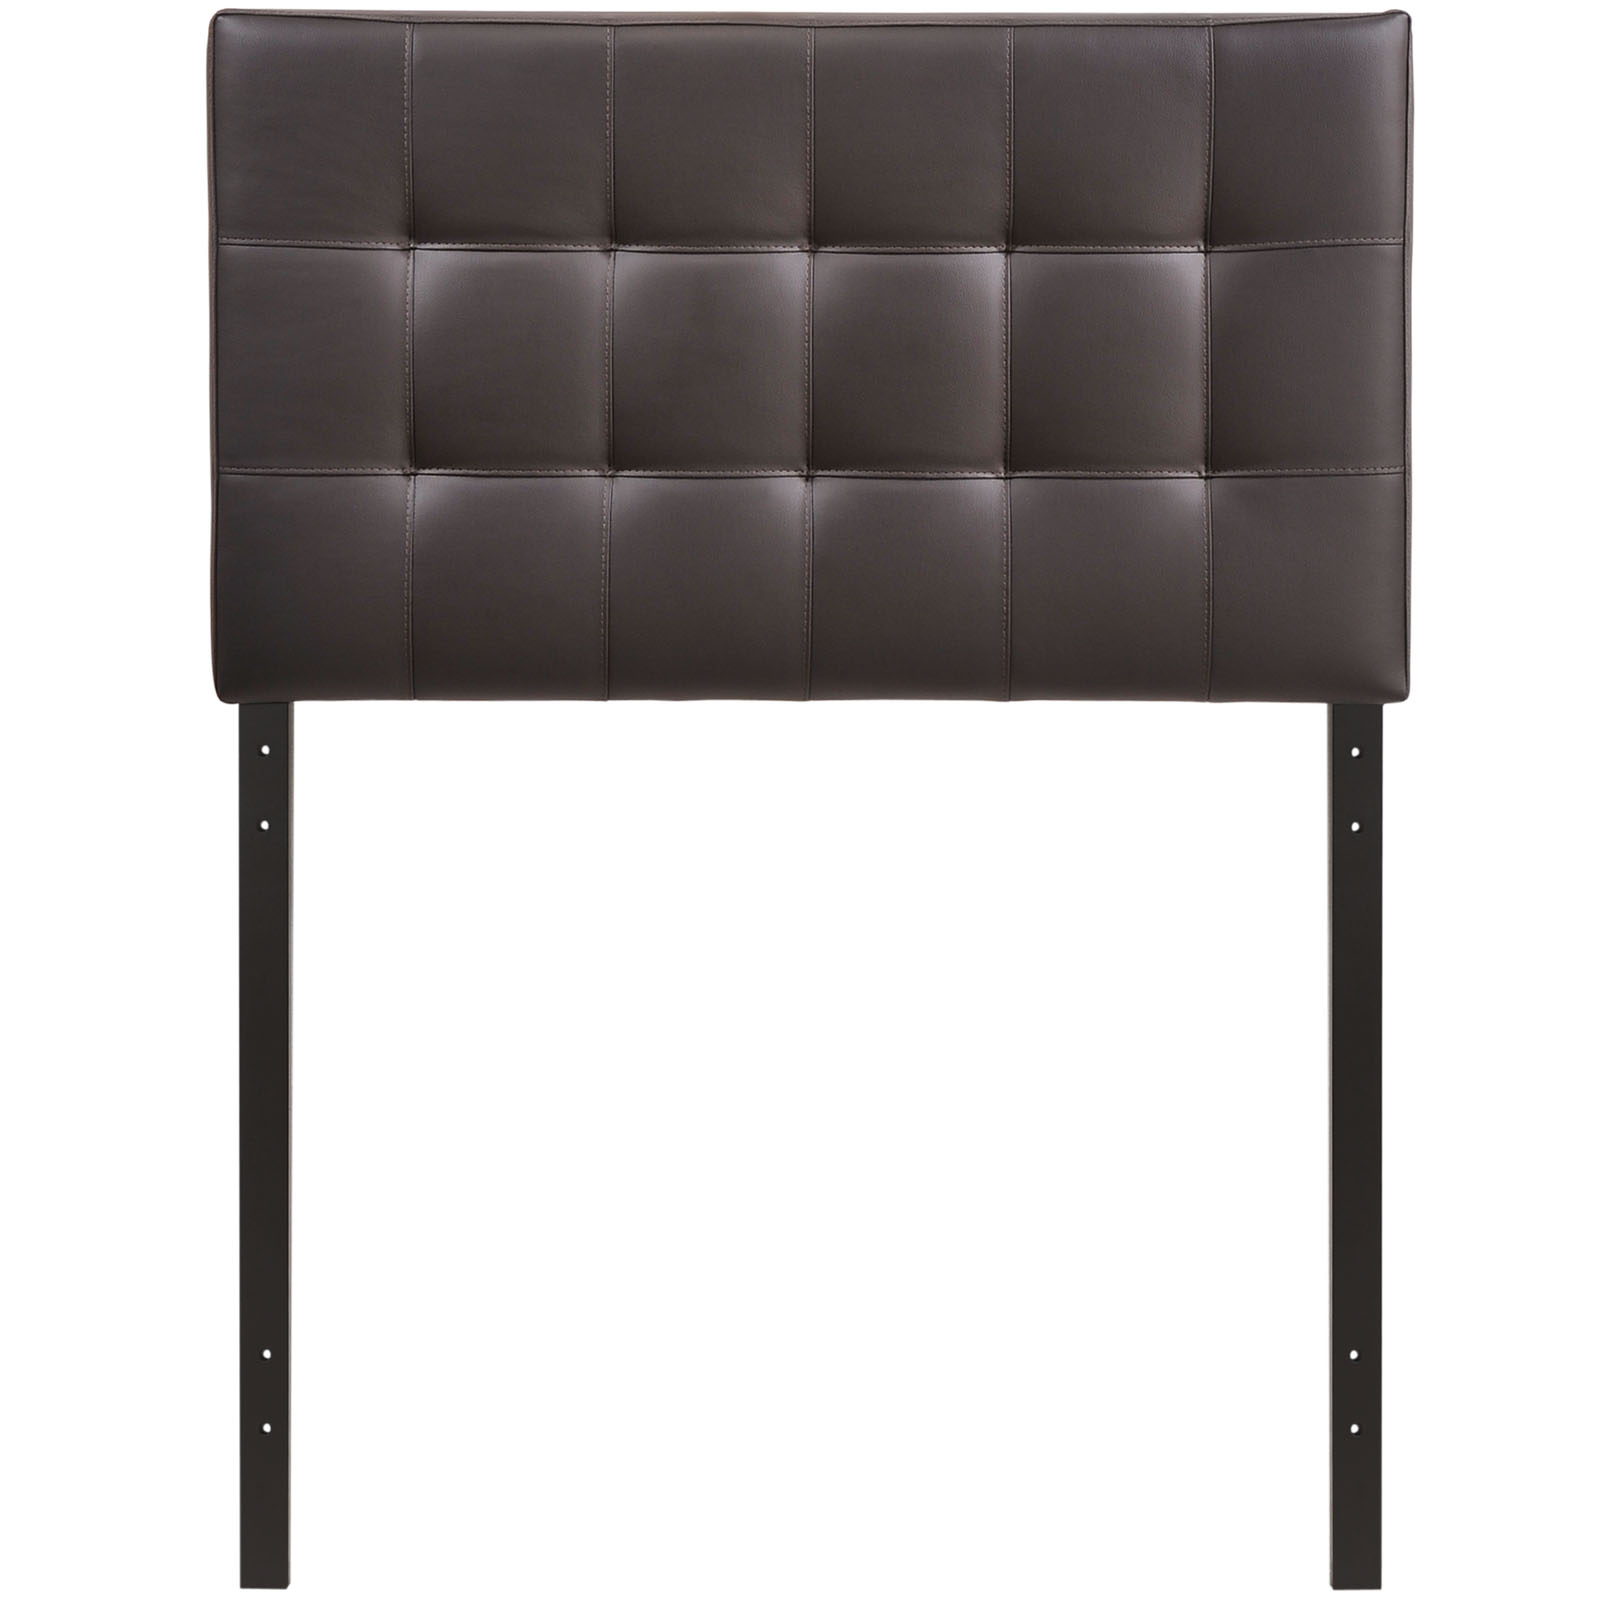 Modway Lily Twin Upholstered Vinyl Headboard in Brown - image 3 of 5